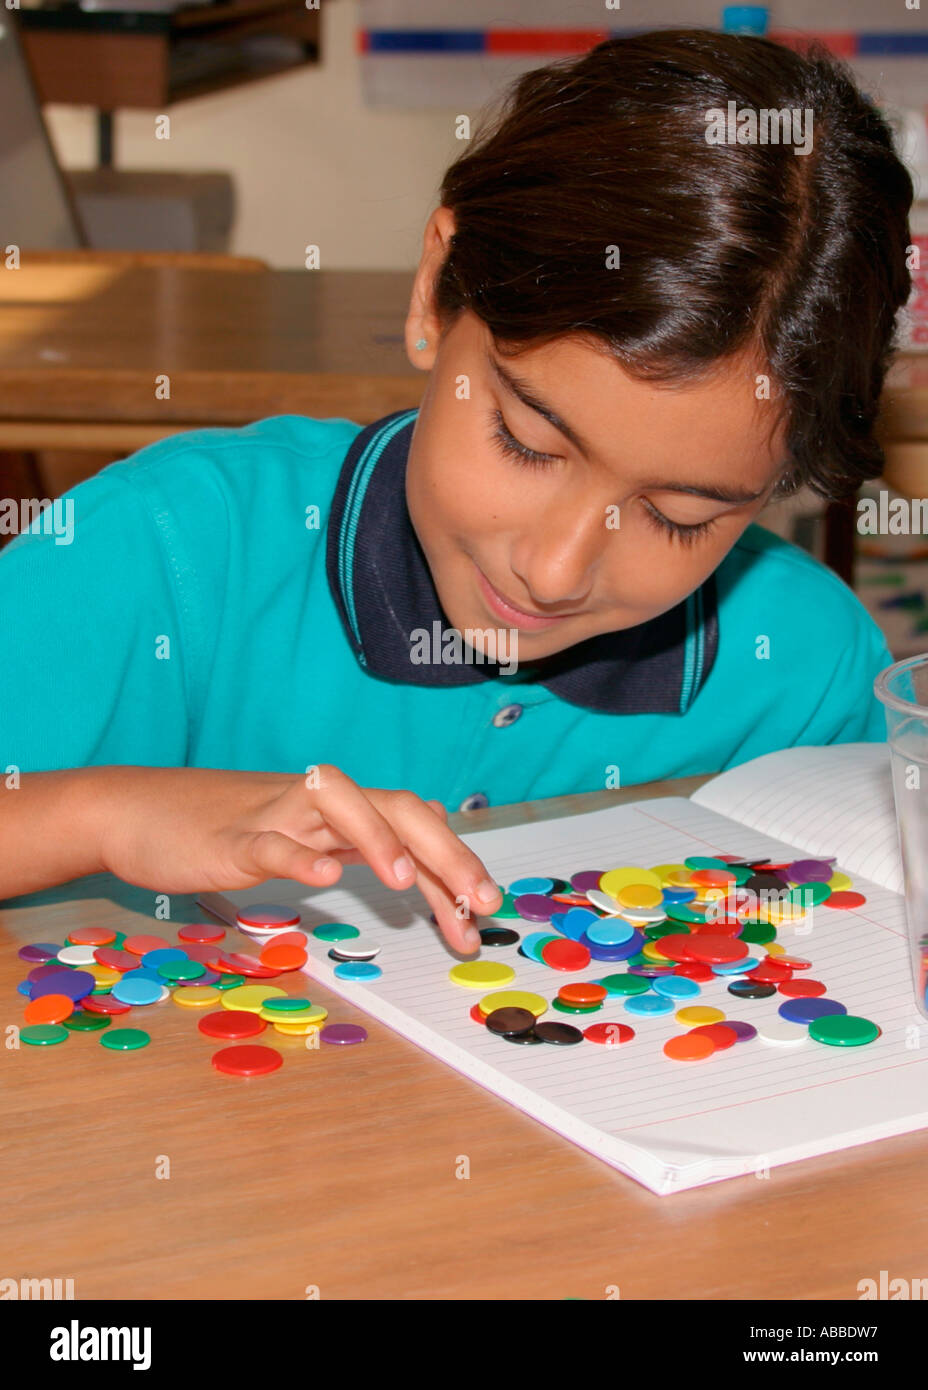 School Girl Counting In Maths Lesson Stock Photo